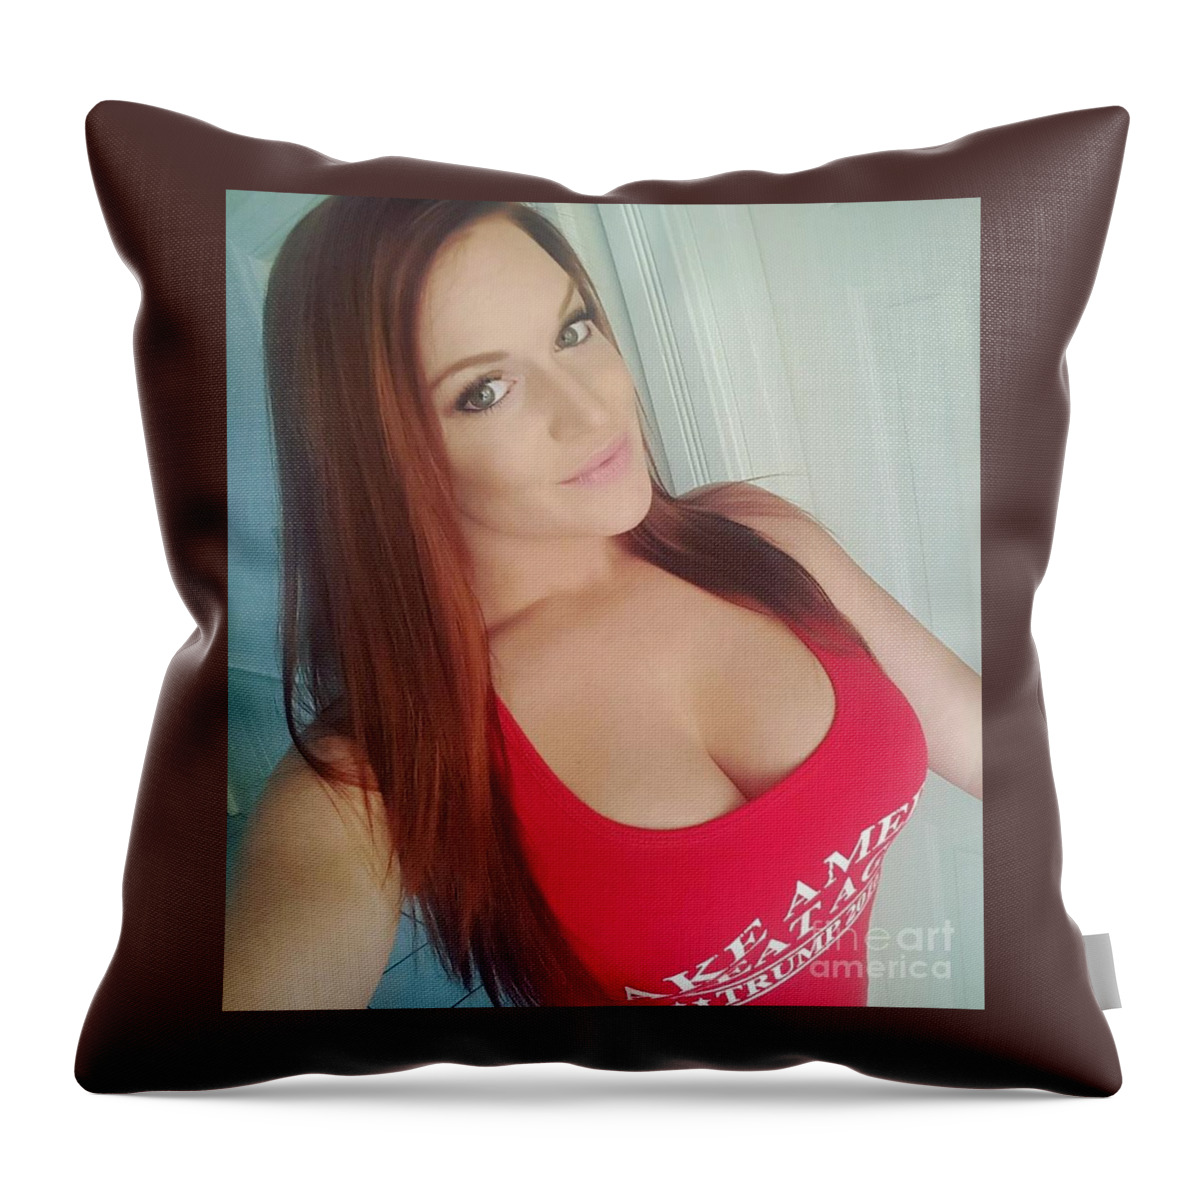 Trump Throw Pillow featuring the photograph Trump Girl 1 by Action